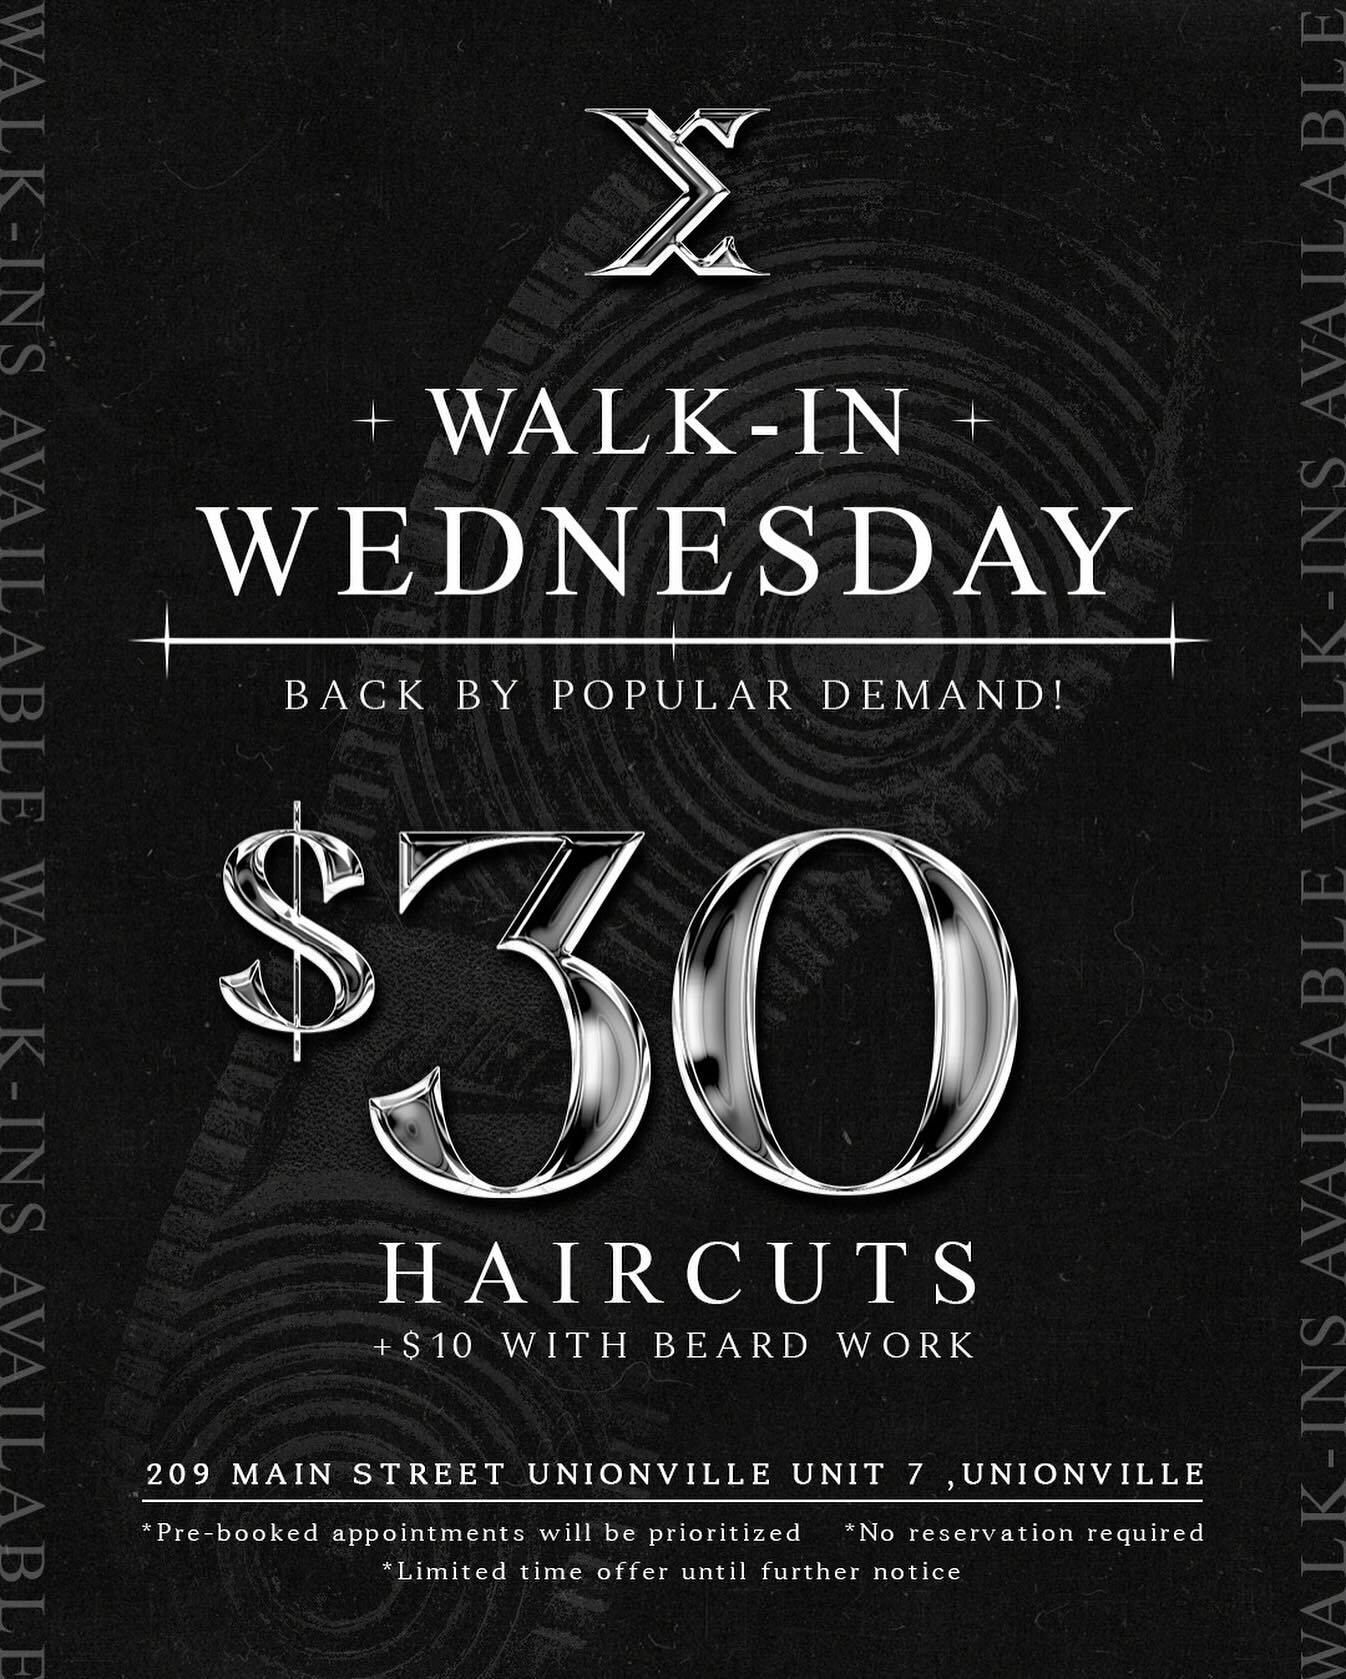 We are excited to announce that our Walk-In Wednesday promotion is back by popular demand and it is here to stay until further notice.

The Limited Time Promotional Offer includes a $30 Haircut for those who walk into Eternal Hair Studio with no appo